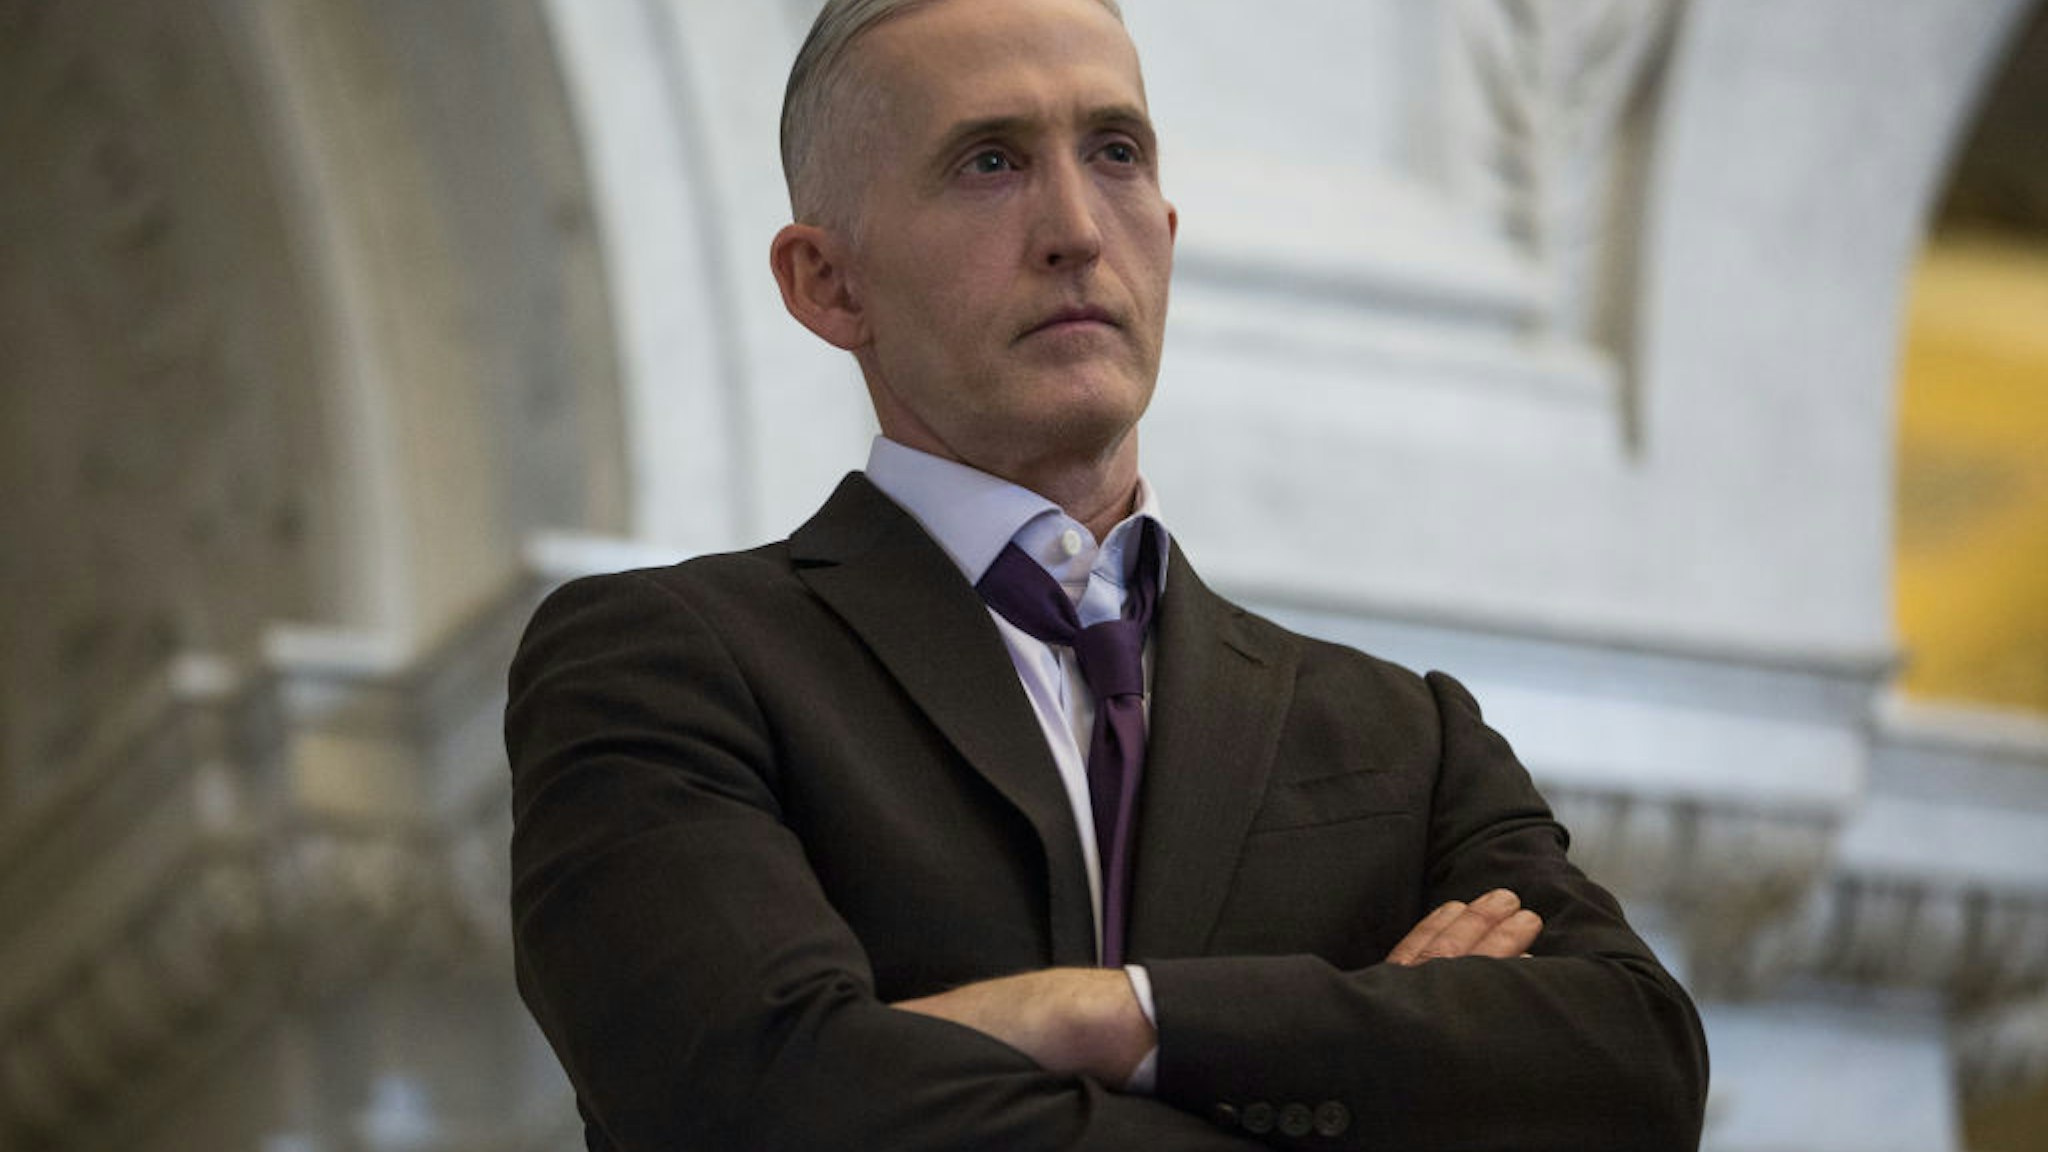 Representative Trey Gowdy, a Republican from South Carolina, listens while U.S. House Speaker Paul Ryan, a Republican from Wisconsin, not pictured, delivers a farewell address at the Library of Congress in Washington, D.C., U.S., on Wednesday, Dec. 19, 2018. Ryan may cap off his time as House speaker by shutting down part of the federal government, barring an unexpected breakthrough this week.